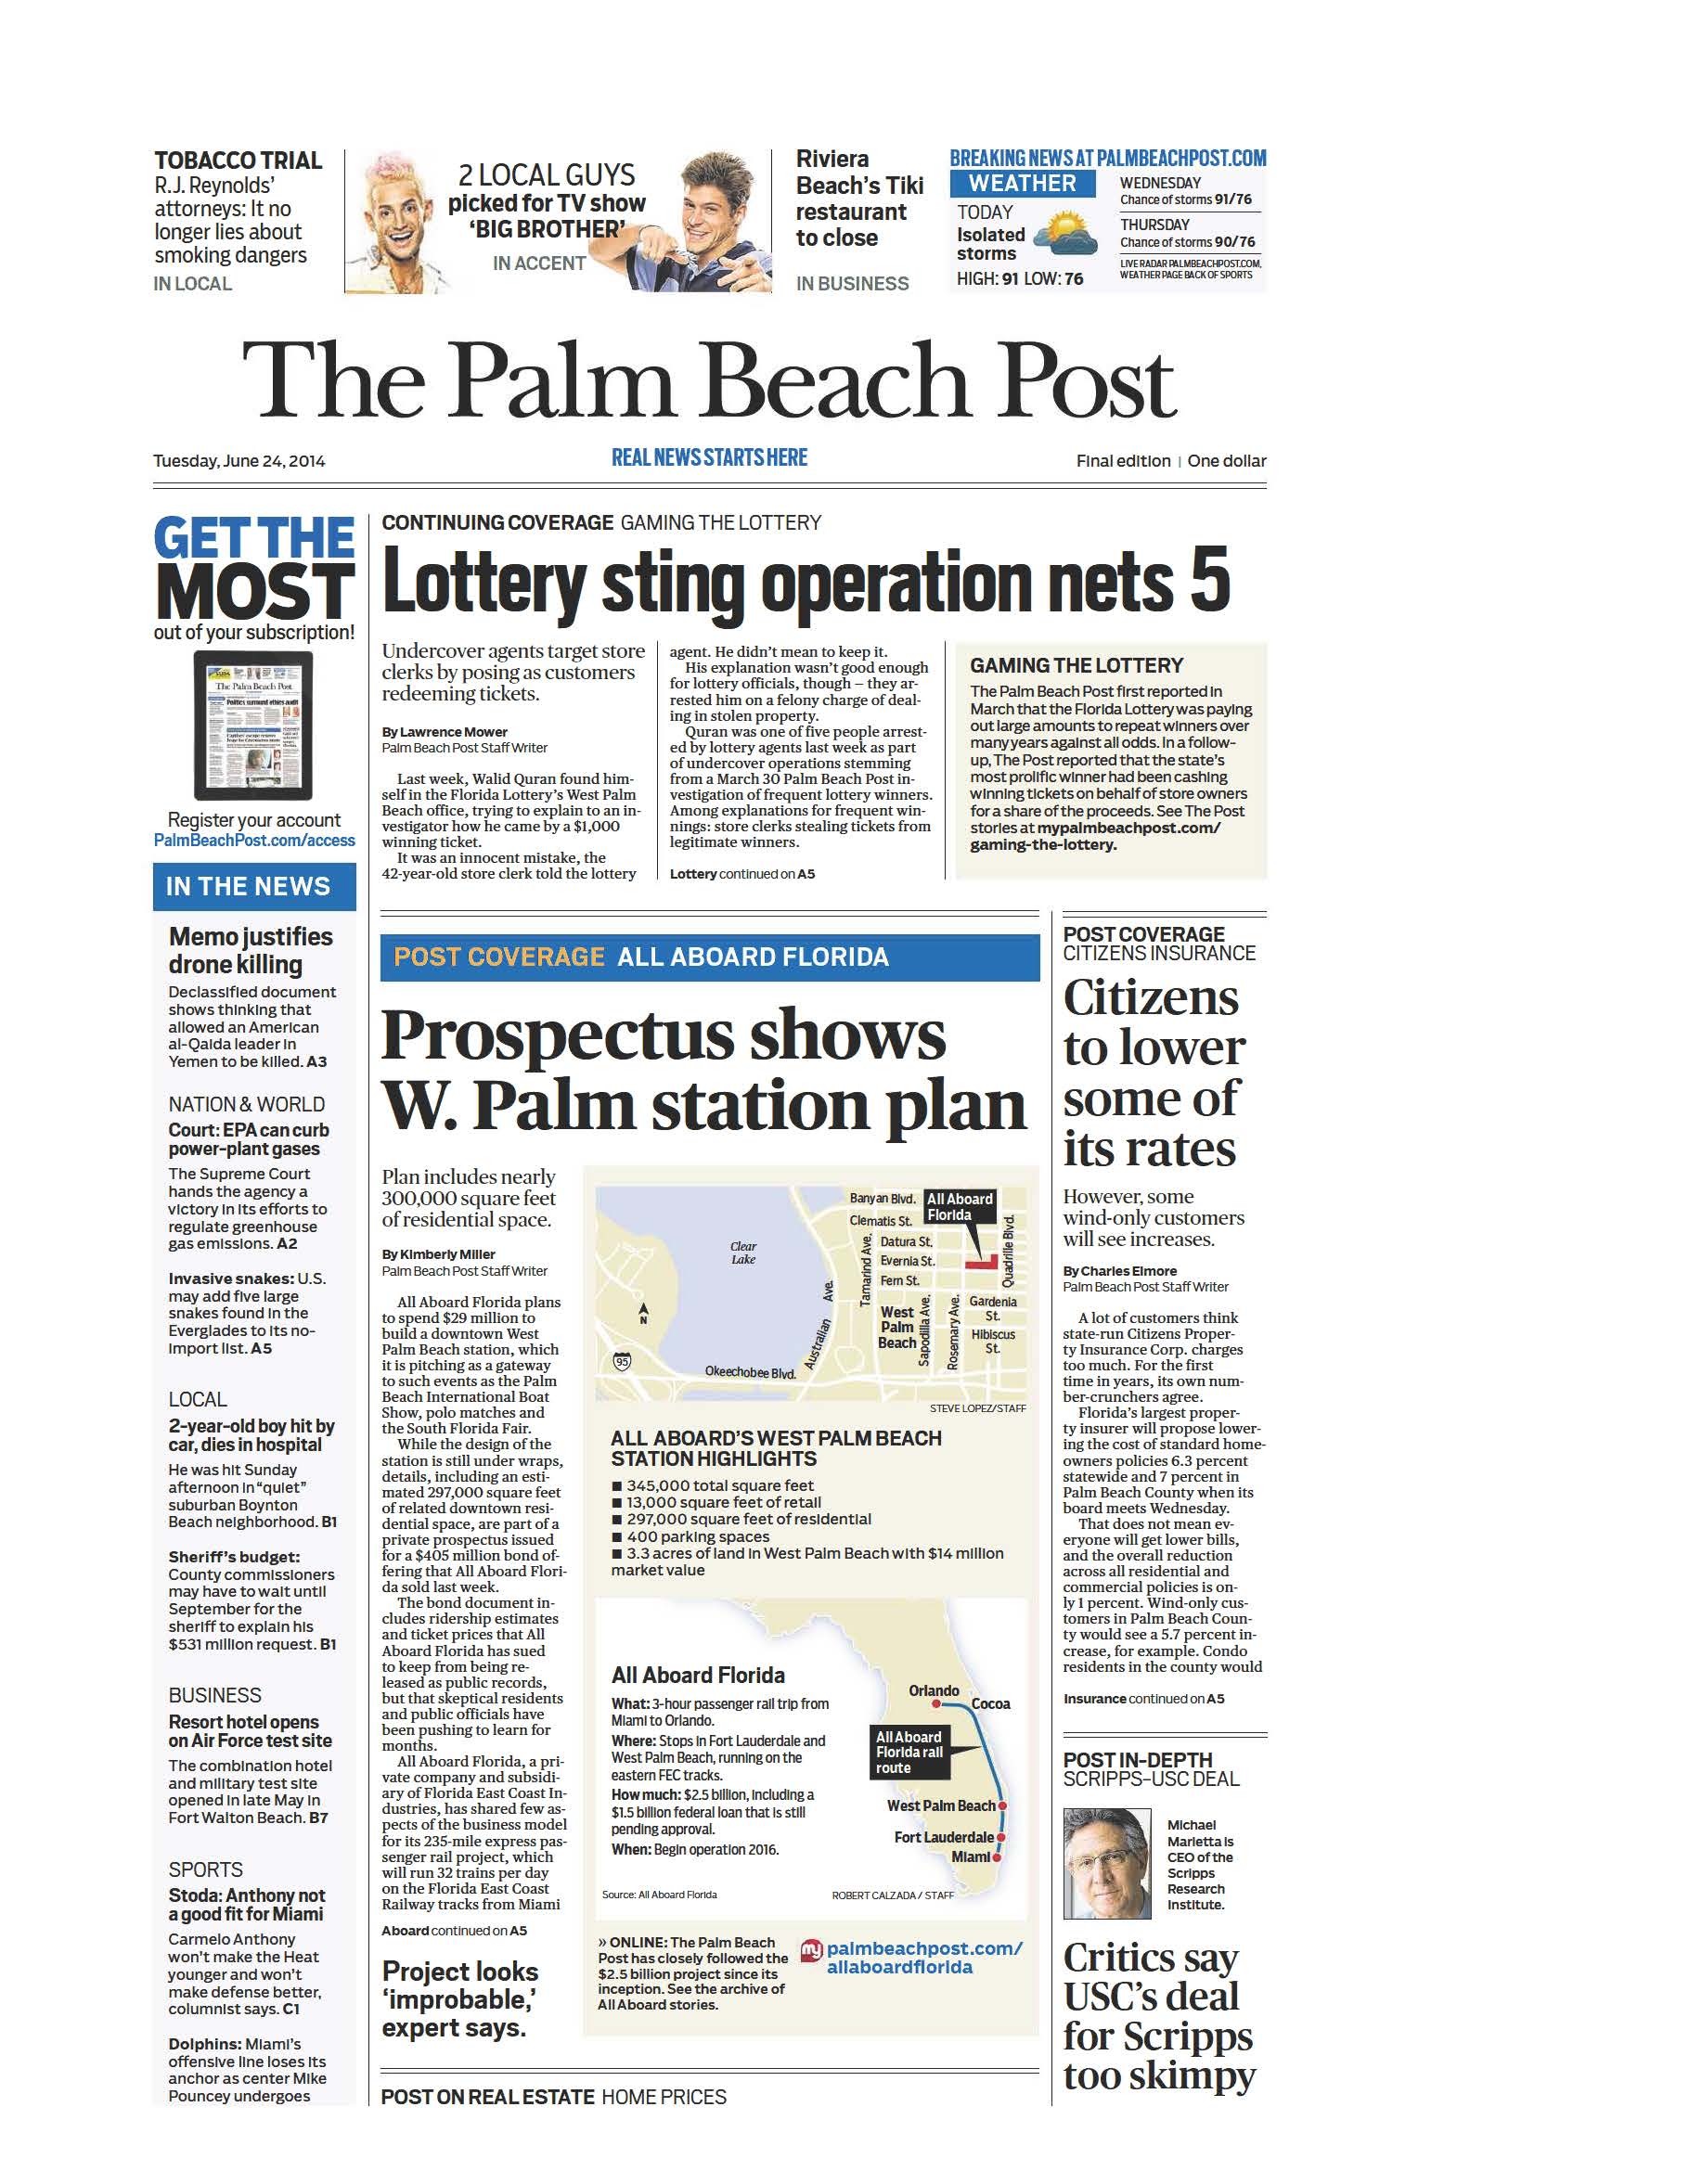 FP Palm Beach Post, Tuesday, June 24 NewsMark Public Relations